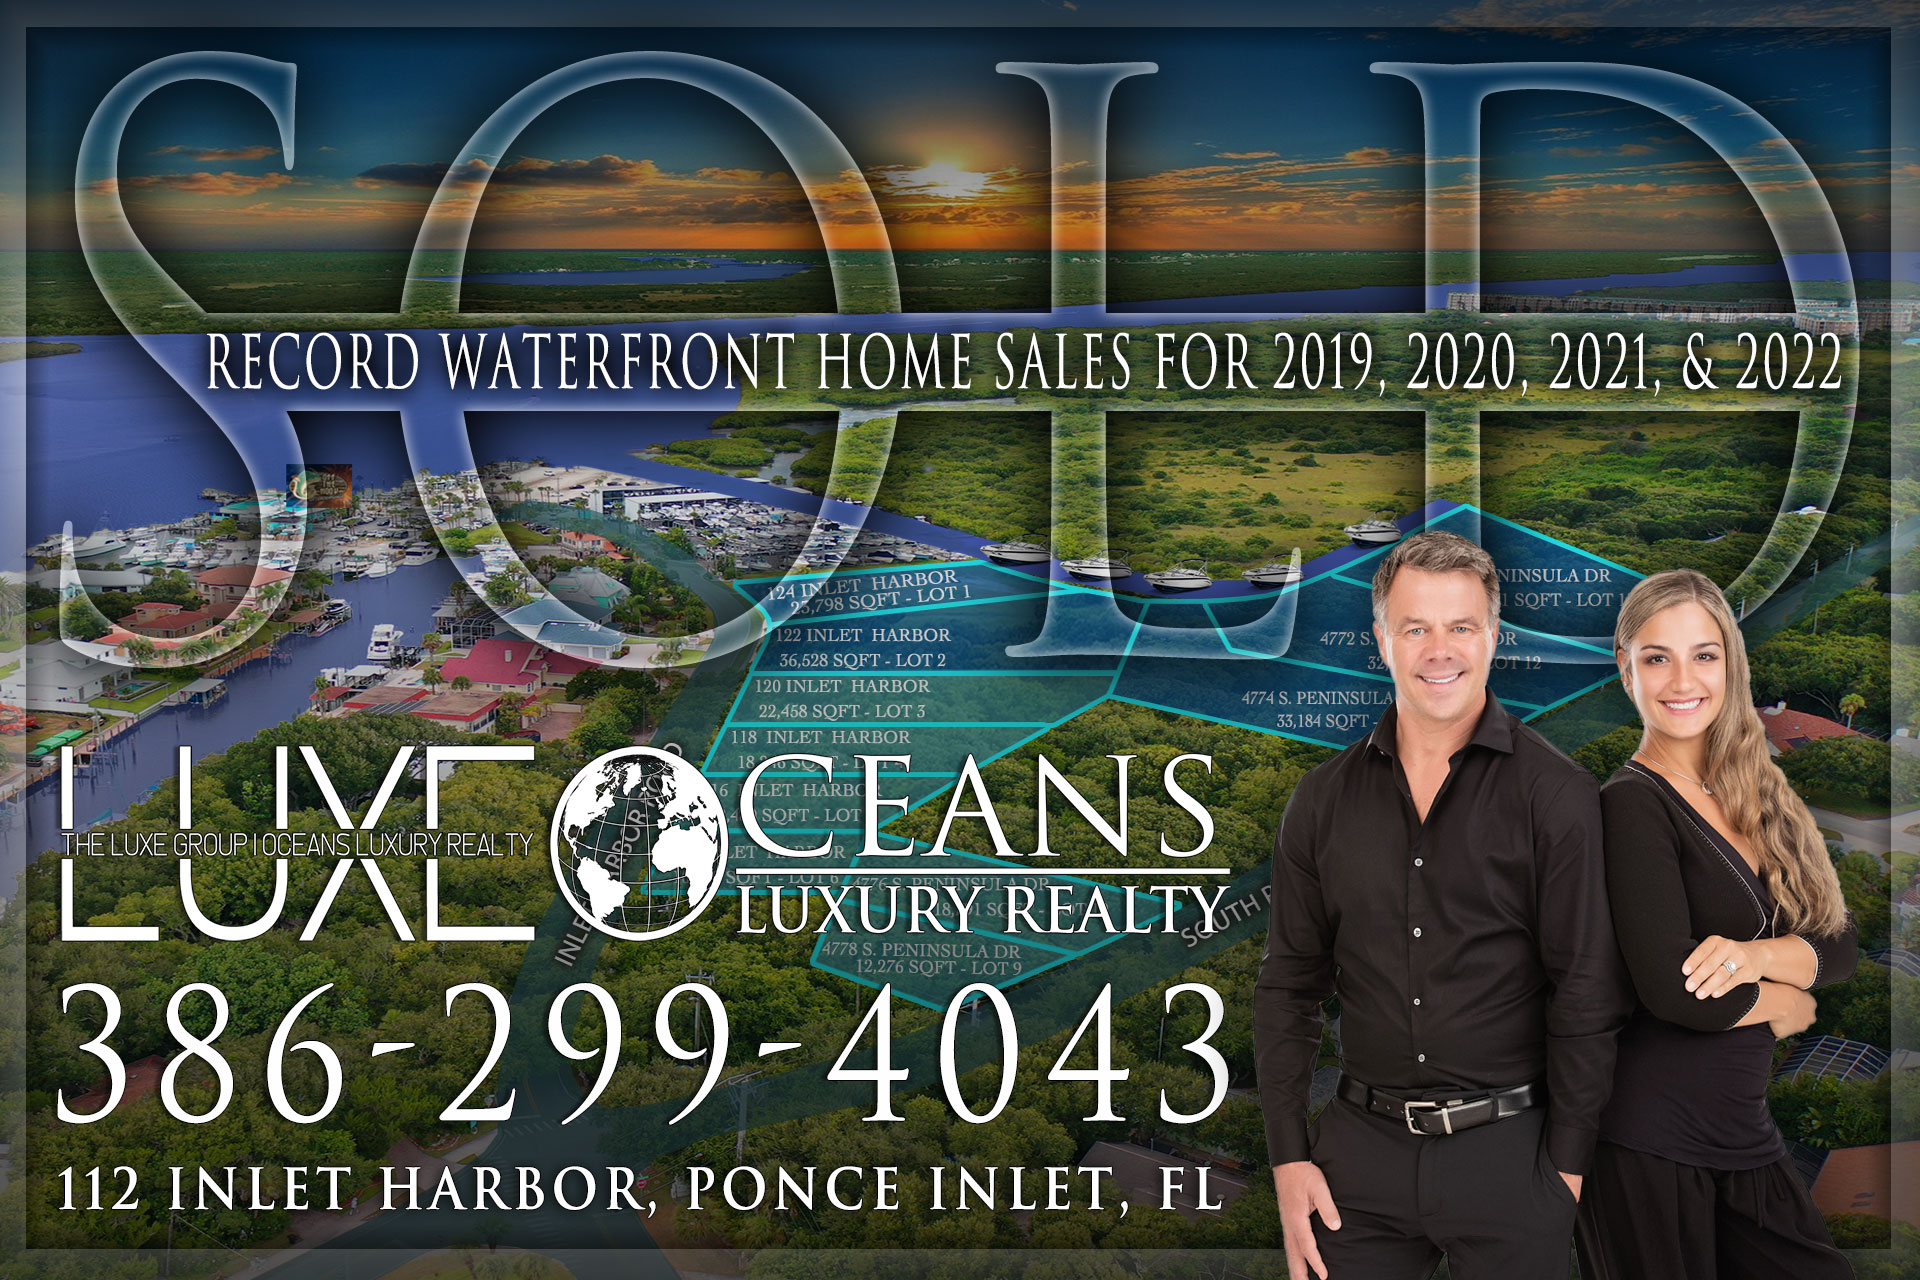 Inlet Harbor Estates. 112 Inlet Harbor Road. Luxury Ponce Inlet, Florida Home Lots For Sale. The LUXE Group at Oceans Luxury Realty 386-29-4043